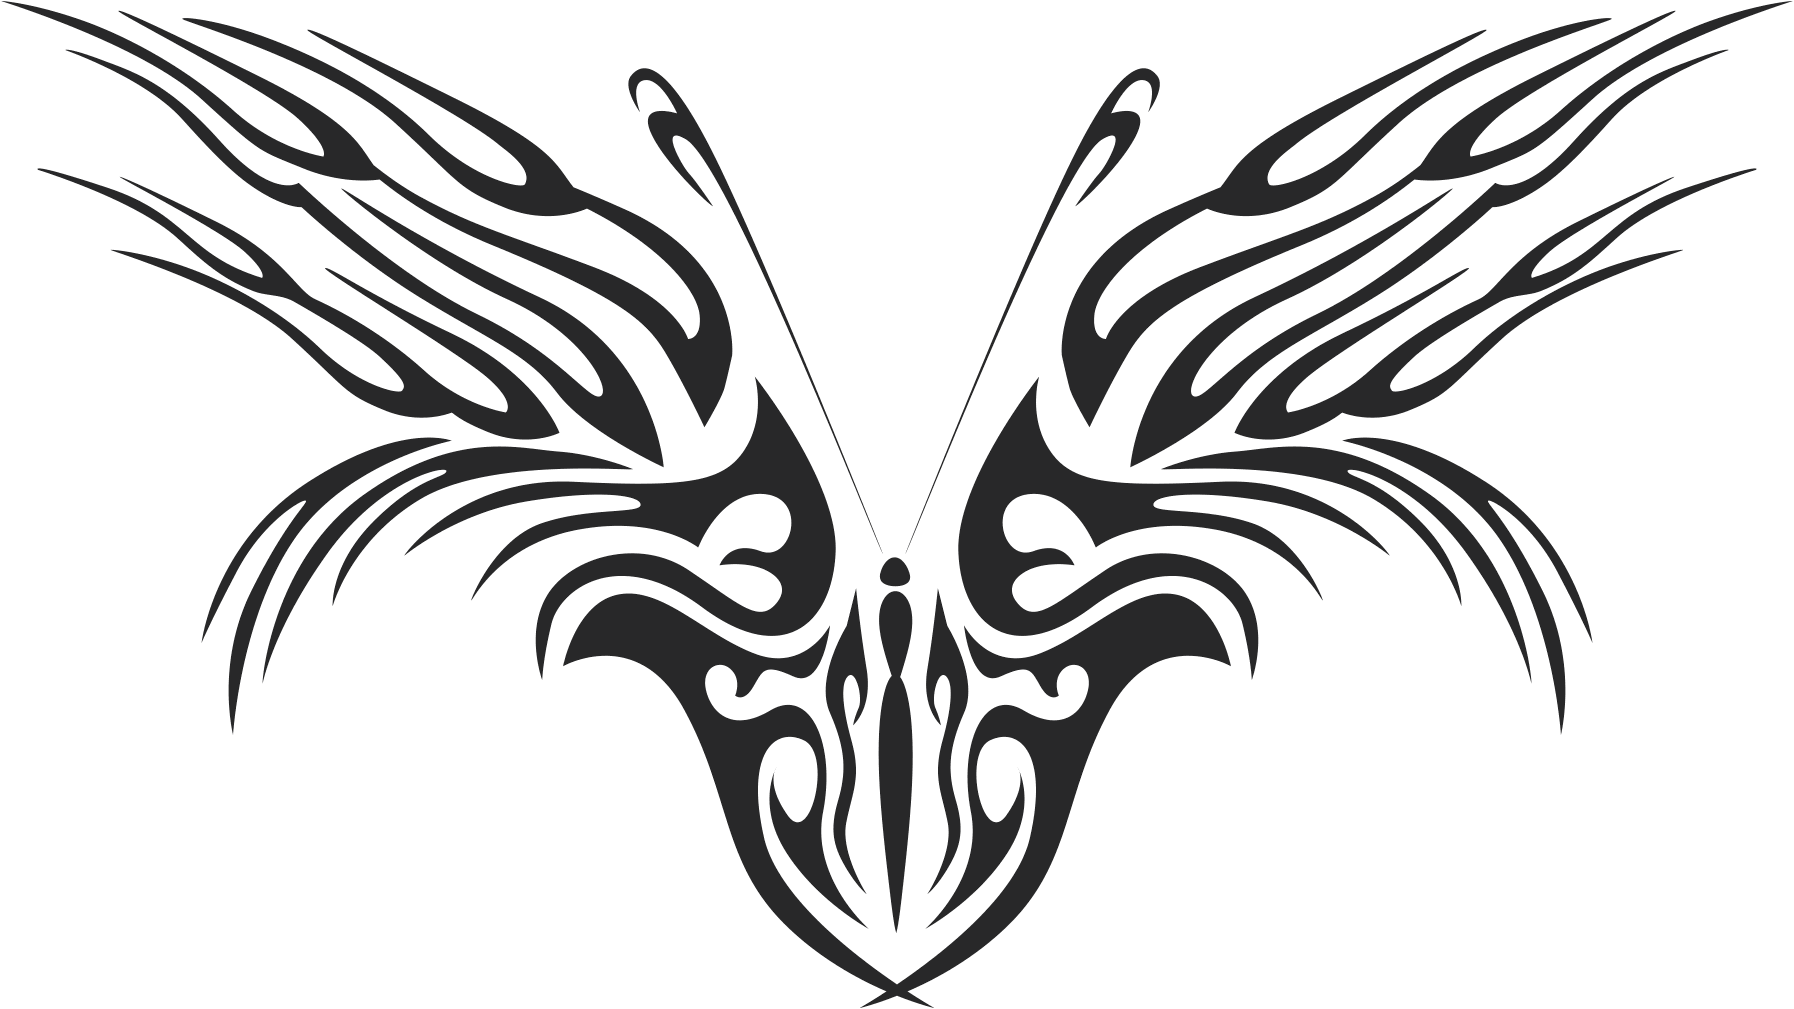 Tattoo Tribal Butterfly CDR File